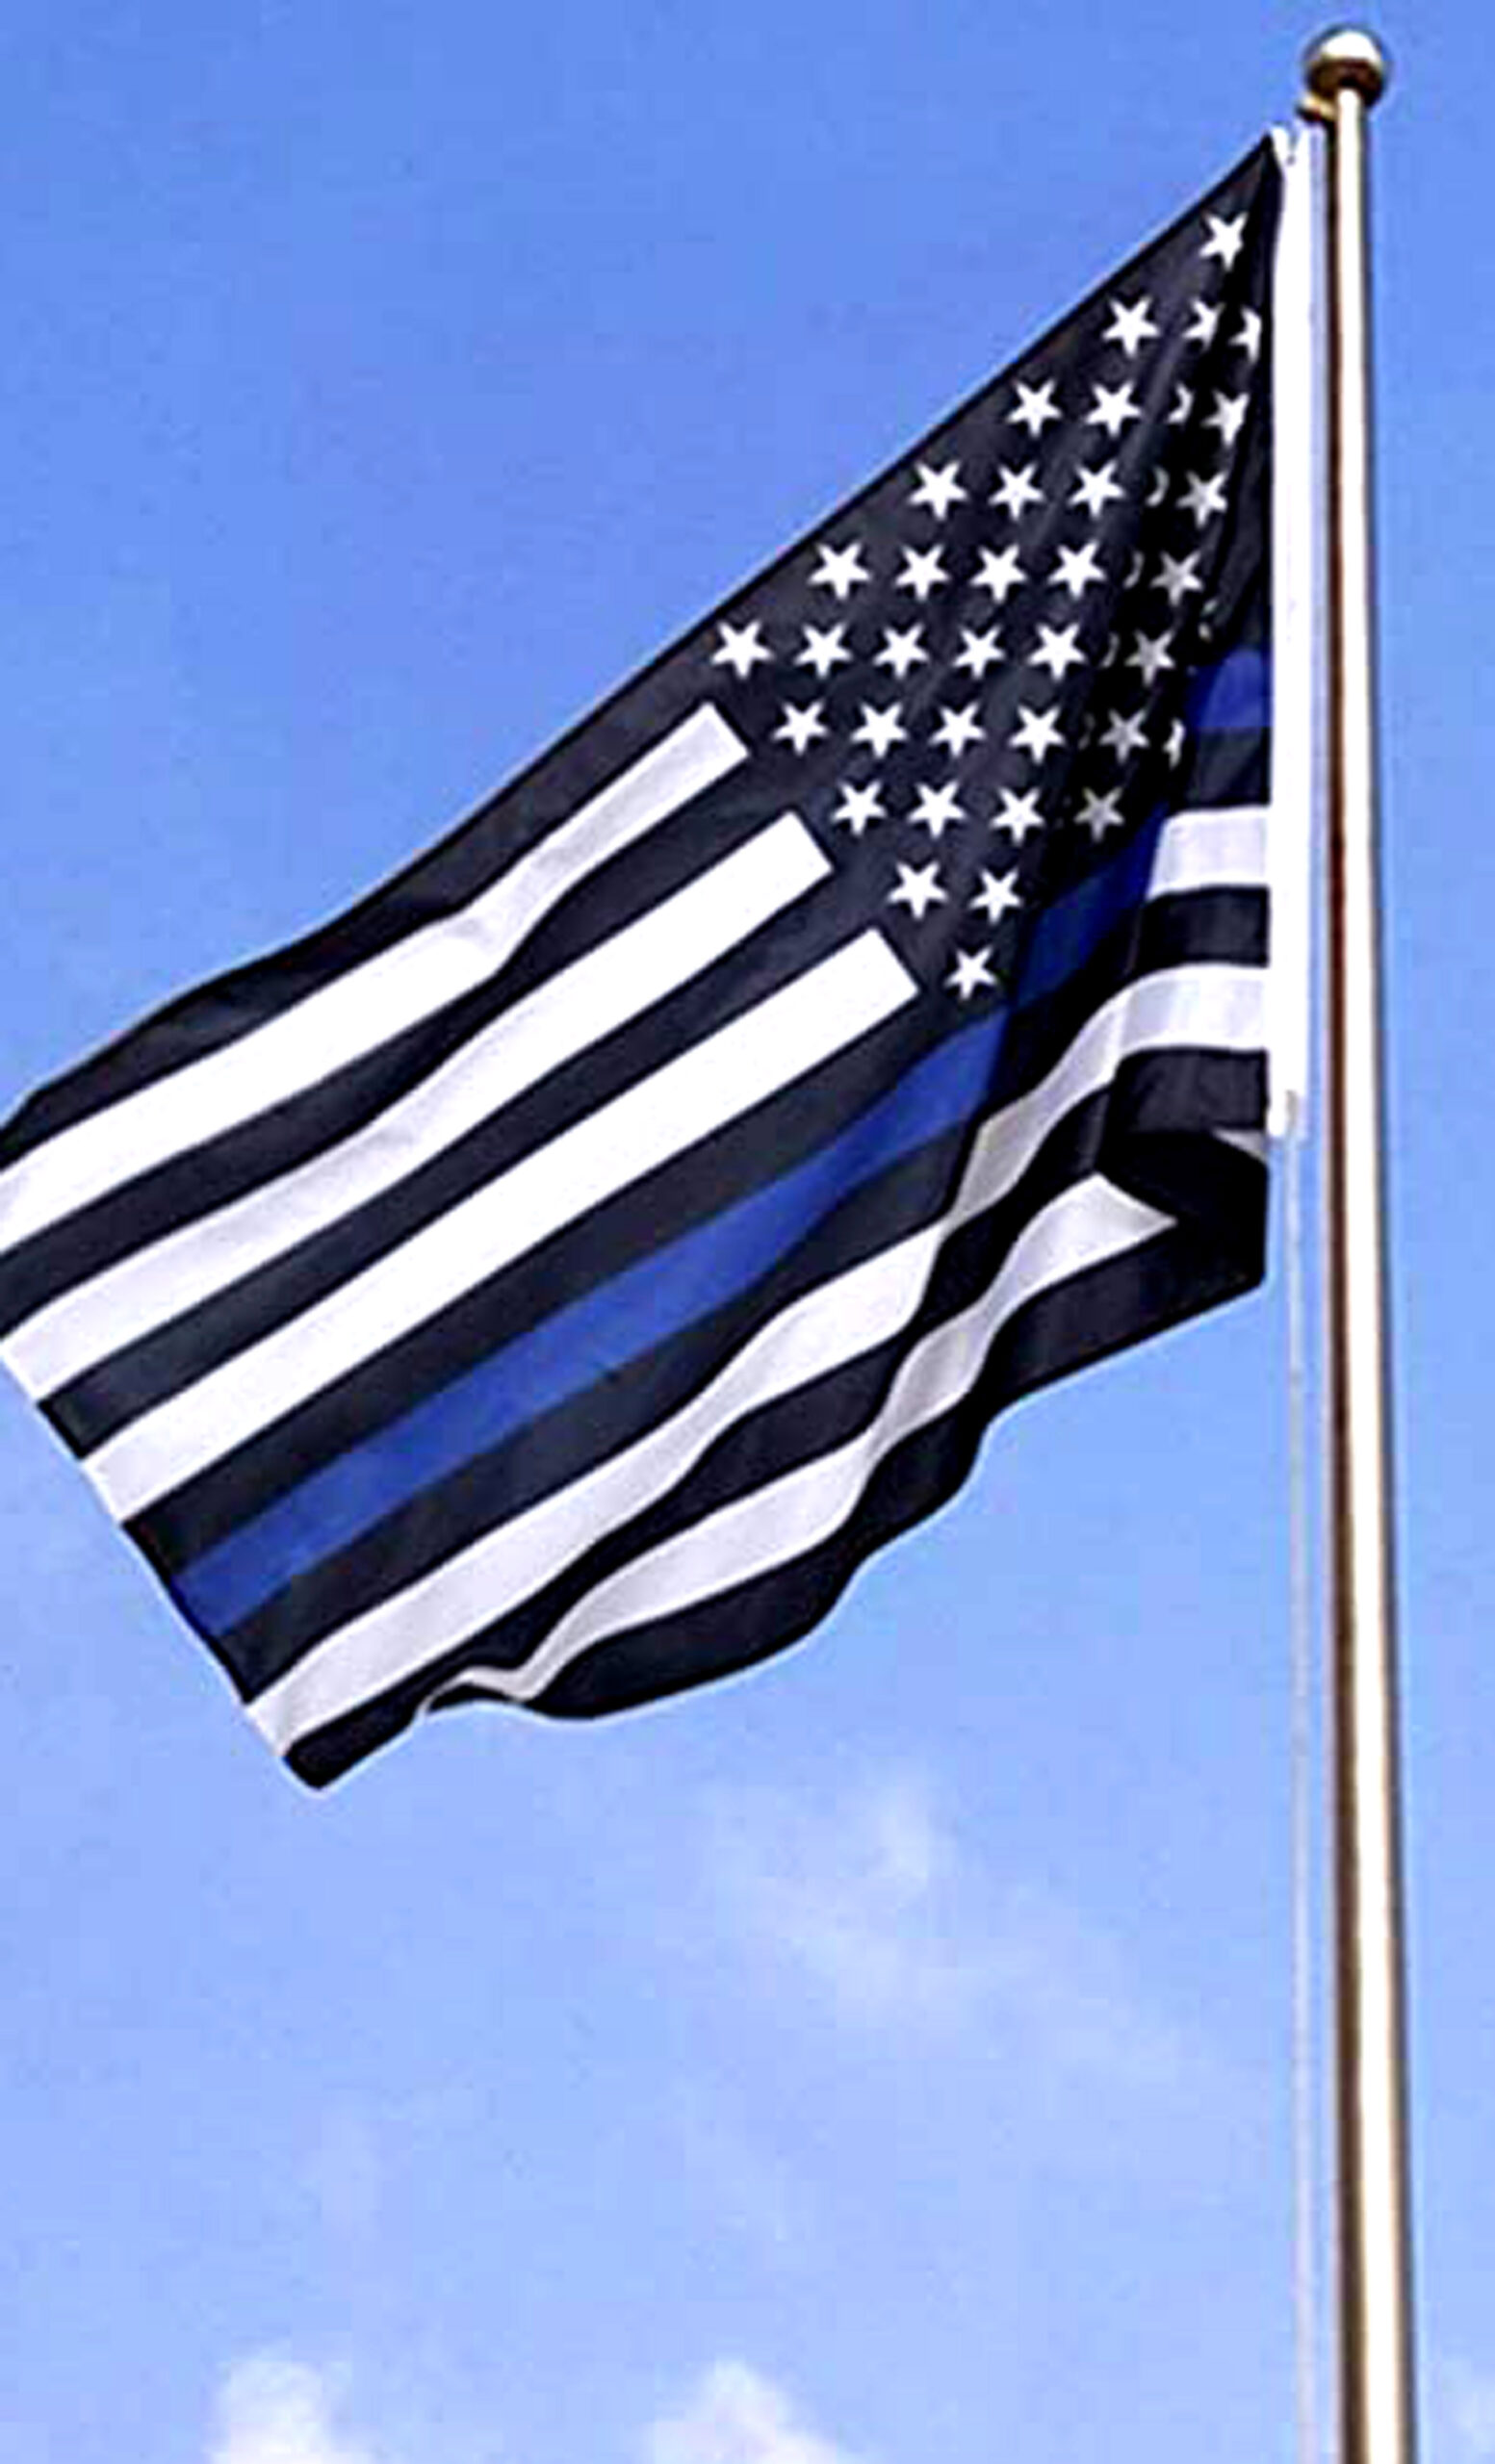 Mayor, Council Member, Police Chief Set Record Straight On Flag – All ...